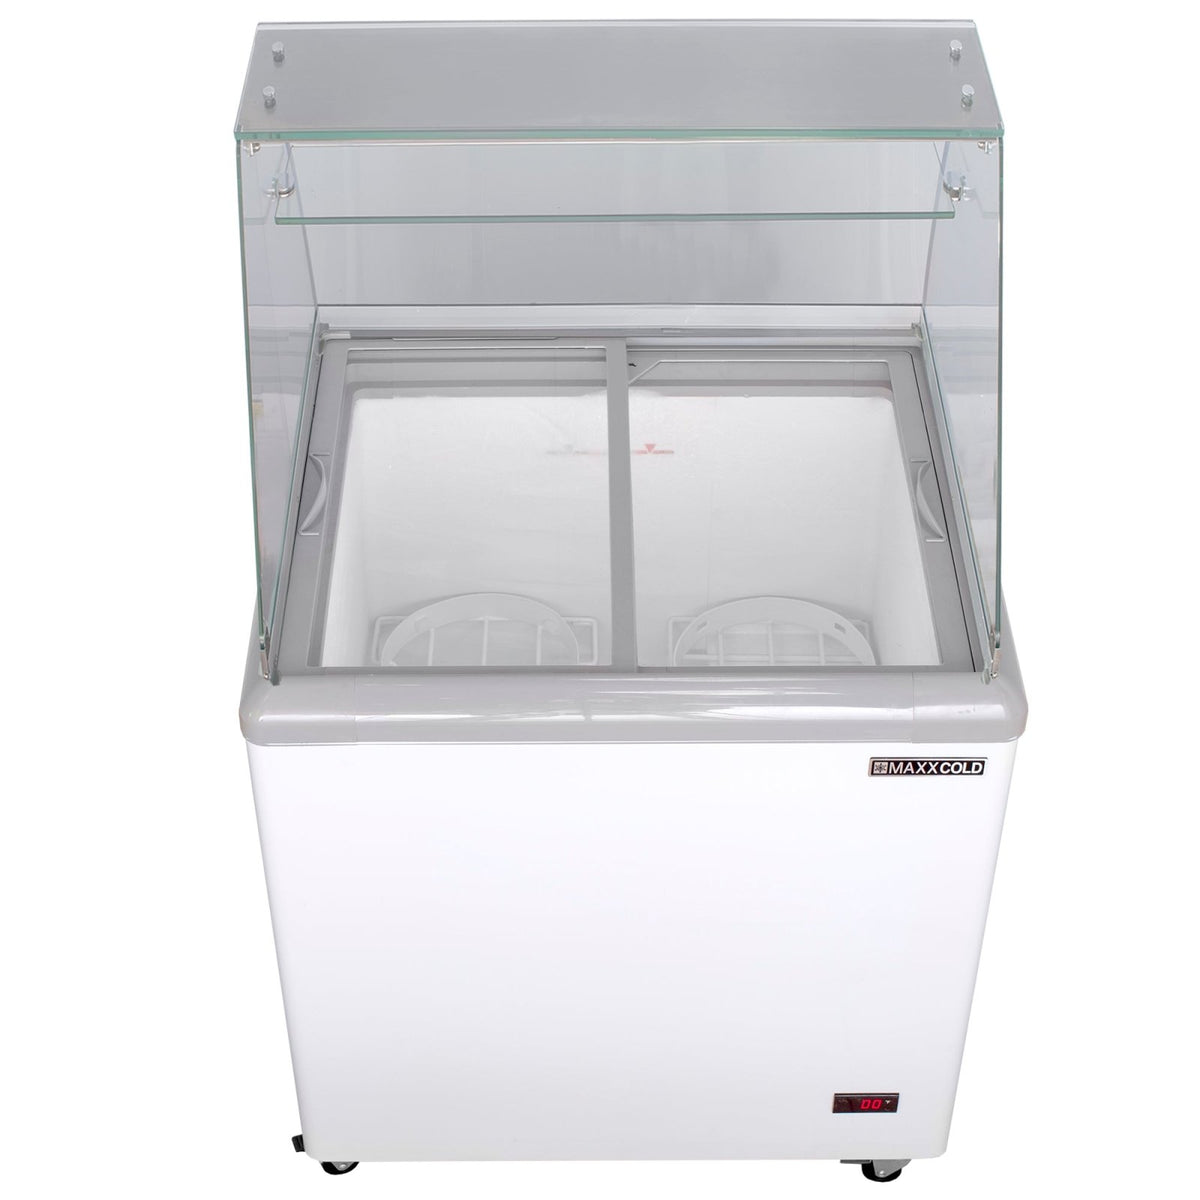 Maxx Cold MXDC - 4 X - Series Ice Cream Dipping Cabinet Freezer with Curved Glass Sneeze Guard, 31.5"W, 5.8 cu. ft. Storage Capacity, Holds up to - TheChefStore.Com